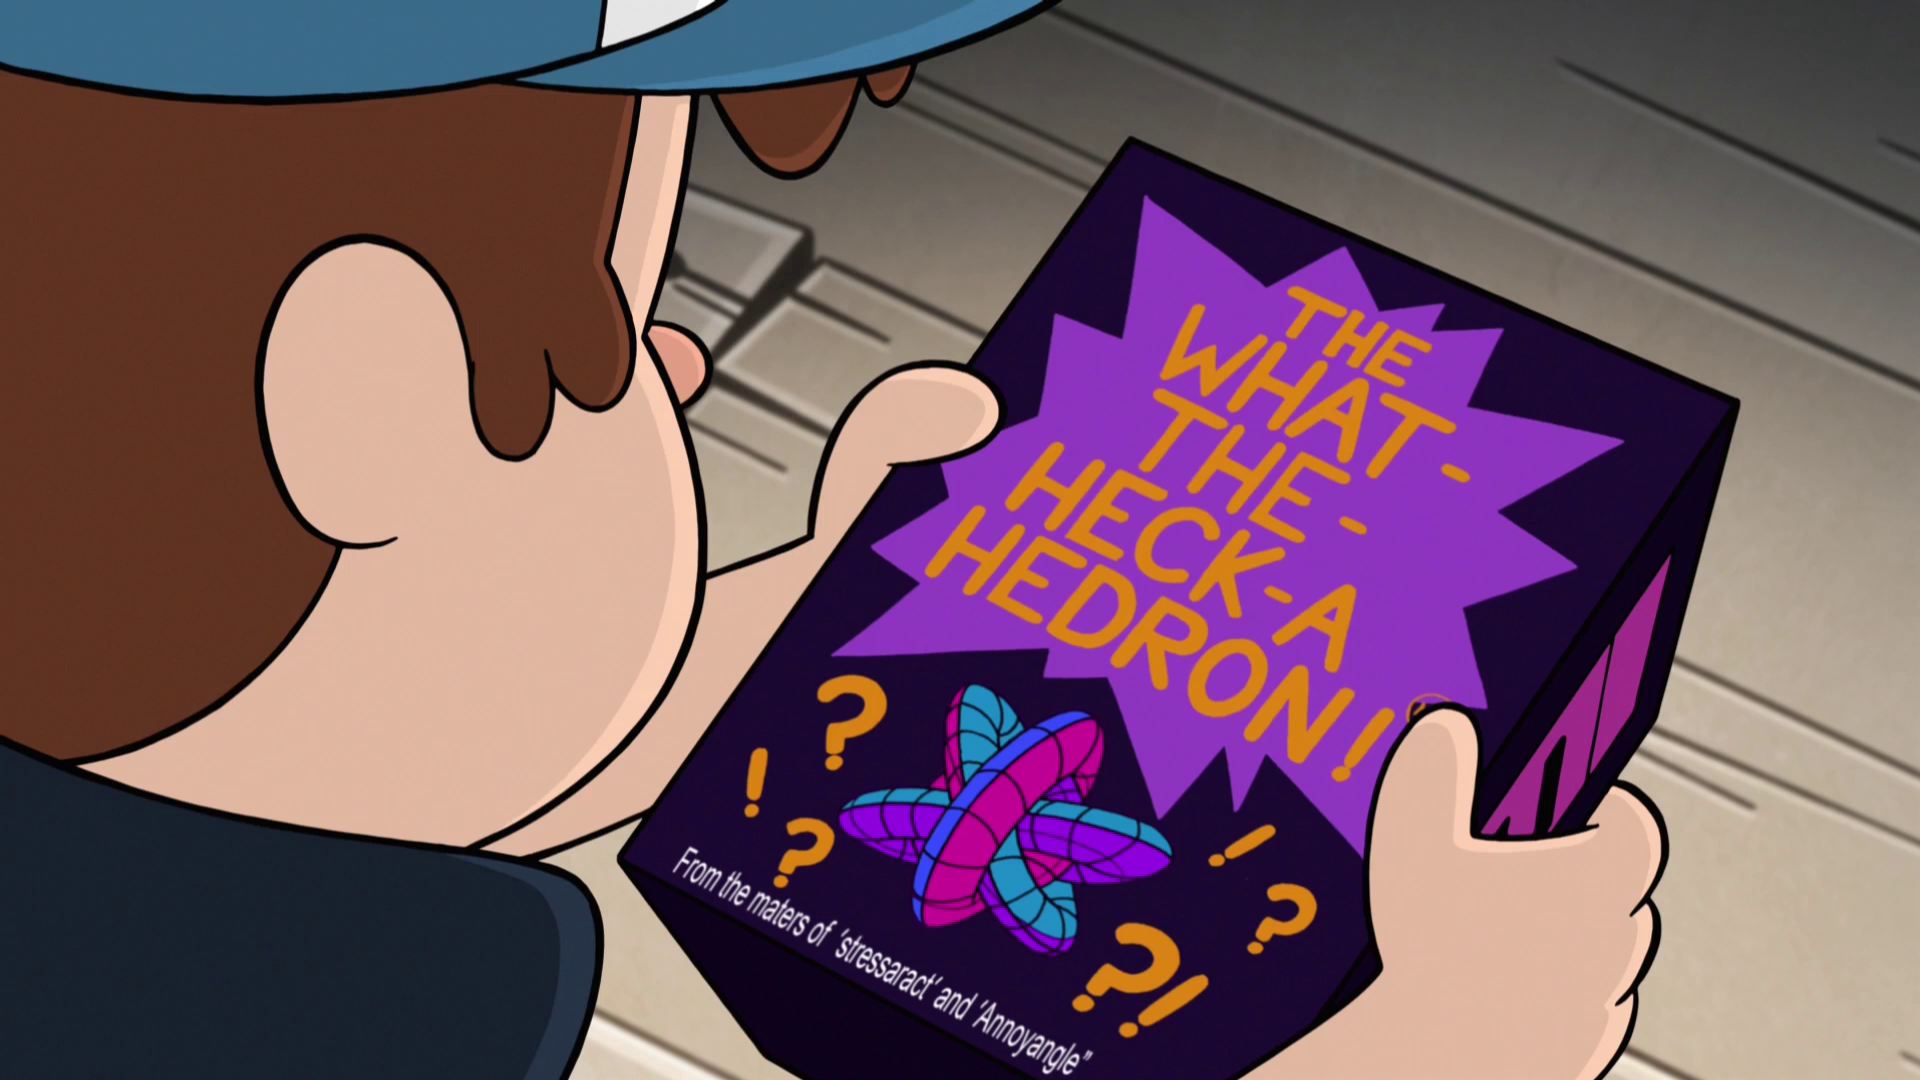 What-the-heck-ahedron | Gravity Falls Wiki | Fandom powered by Wikia